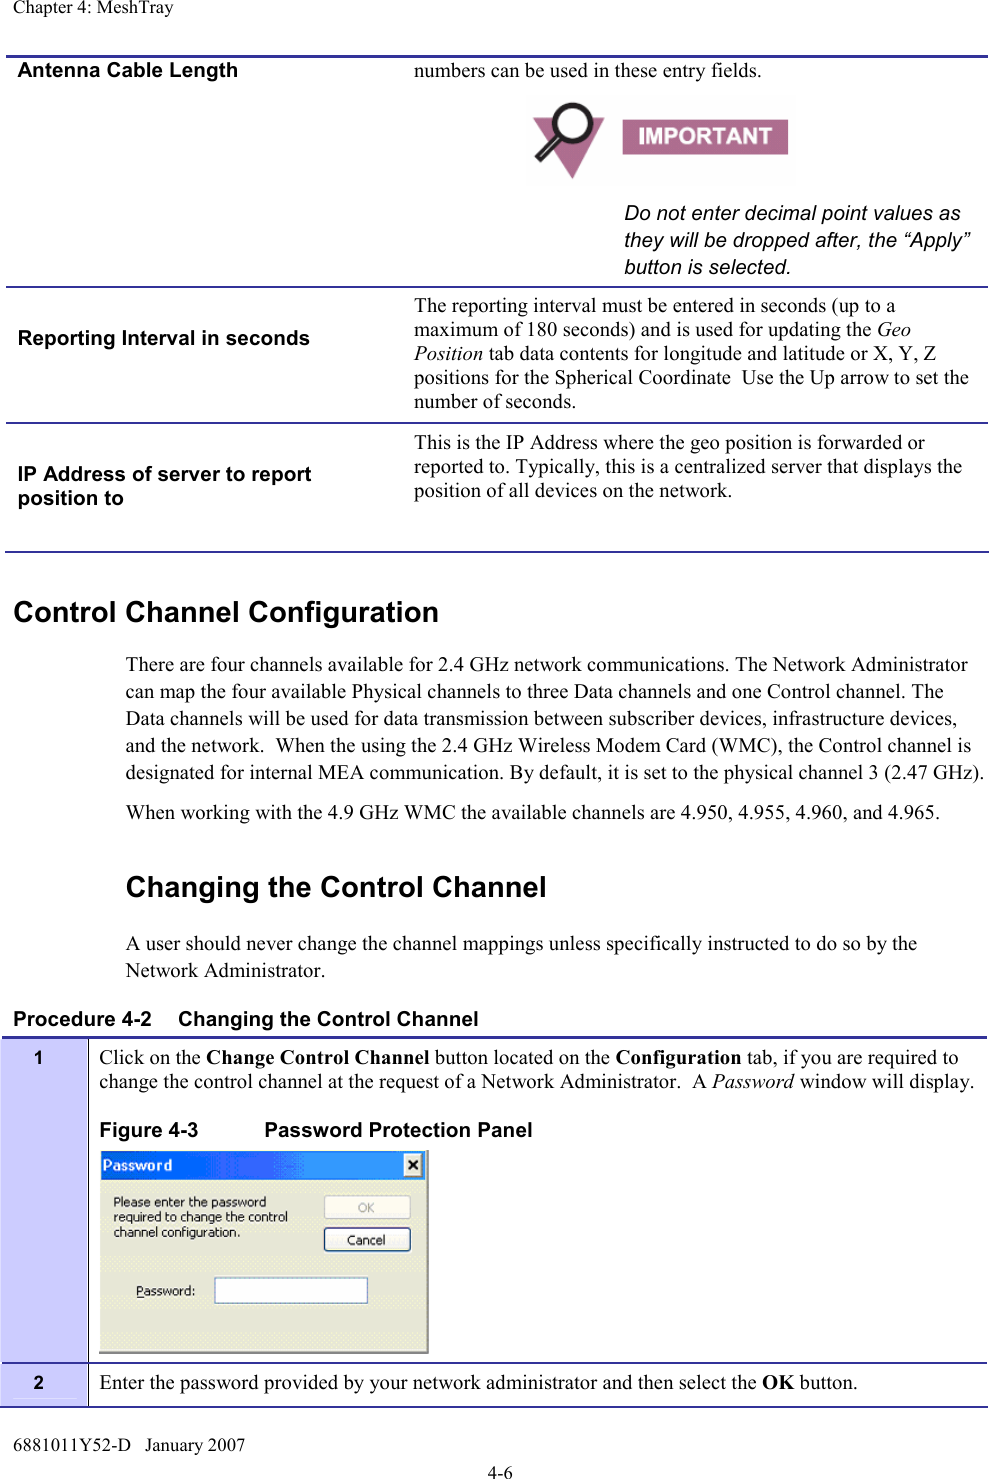 Chapter 4: MeshTray 6881011Y52-D   January 2007 4-6 Control Channel Configuration There are four channels available for 2.4 GHz network communications. The Network Administrator can map the four available Physical channels to three Data channels and one Control channel. The Data channels will be used for data transmission between subscriber devices, infrastructure devices, and the network.  When the using the 2.4 GHz Wireless Modem Card (WMC), the Control channel is designated for internal MEA communication. By default, it is set to the physical channel 3 (2.47 GHz). When working with the 4.9 GHz WMC the available channels are 4.950, 4.955, 4.960, and 4.965. Changing the Control Channel  A user should never change the channel mappings unless specifically instructed to do so by the Network Administrator.   Procedure 4-2  Changing the Control Channel 1  Click on the Change Control Channel button located on the Configuration tab, if you are required to change the control channel at the request of a Network Administrator.  A Password window will display. Figure 4-3  Password Protection Panel  2  Enter the password provided by your network administrator and then select the OK button. Antenna Cable Length  numbers can be used in these entry fields.   Do not enter decimal point values as they will be dropped after, the “Apply” button is selected.  Reporting Interval in seconds  The reporting interval must be entered in seconds (up to a maximum of 180 seconds) and is used for updating the Geo Position tab data contents for longitude and latitude or X, Y, Z positions for the Spherical Coordinate  Use the Up arrow to set the number of seconds.  IP Address of server to report position to  This is the IP Address where the geo position is forwarded or reported to. Typically, this is a centralized server that displays the position of all devices on the network. 